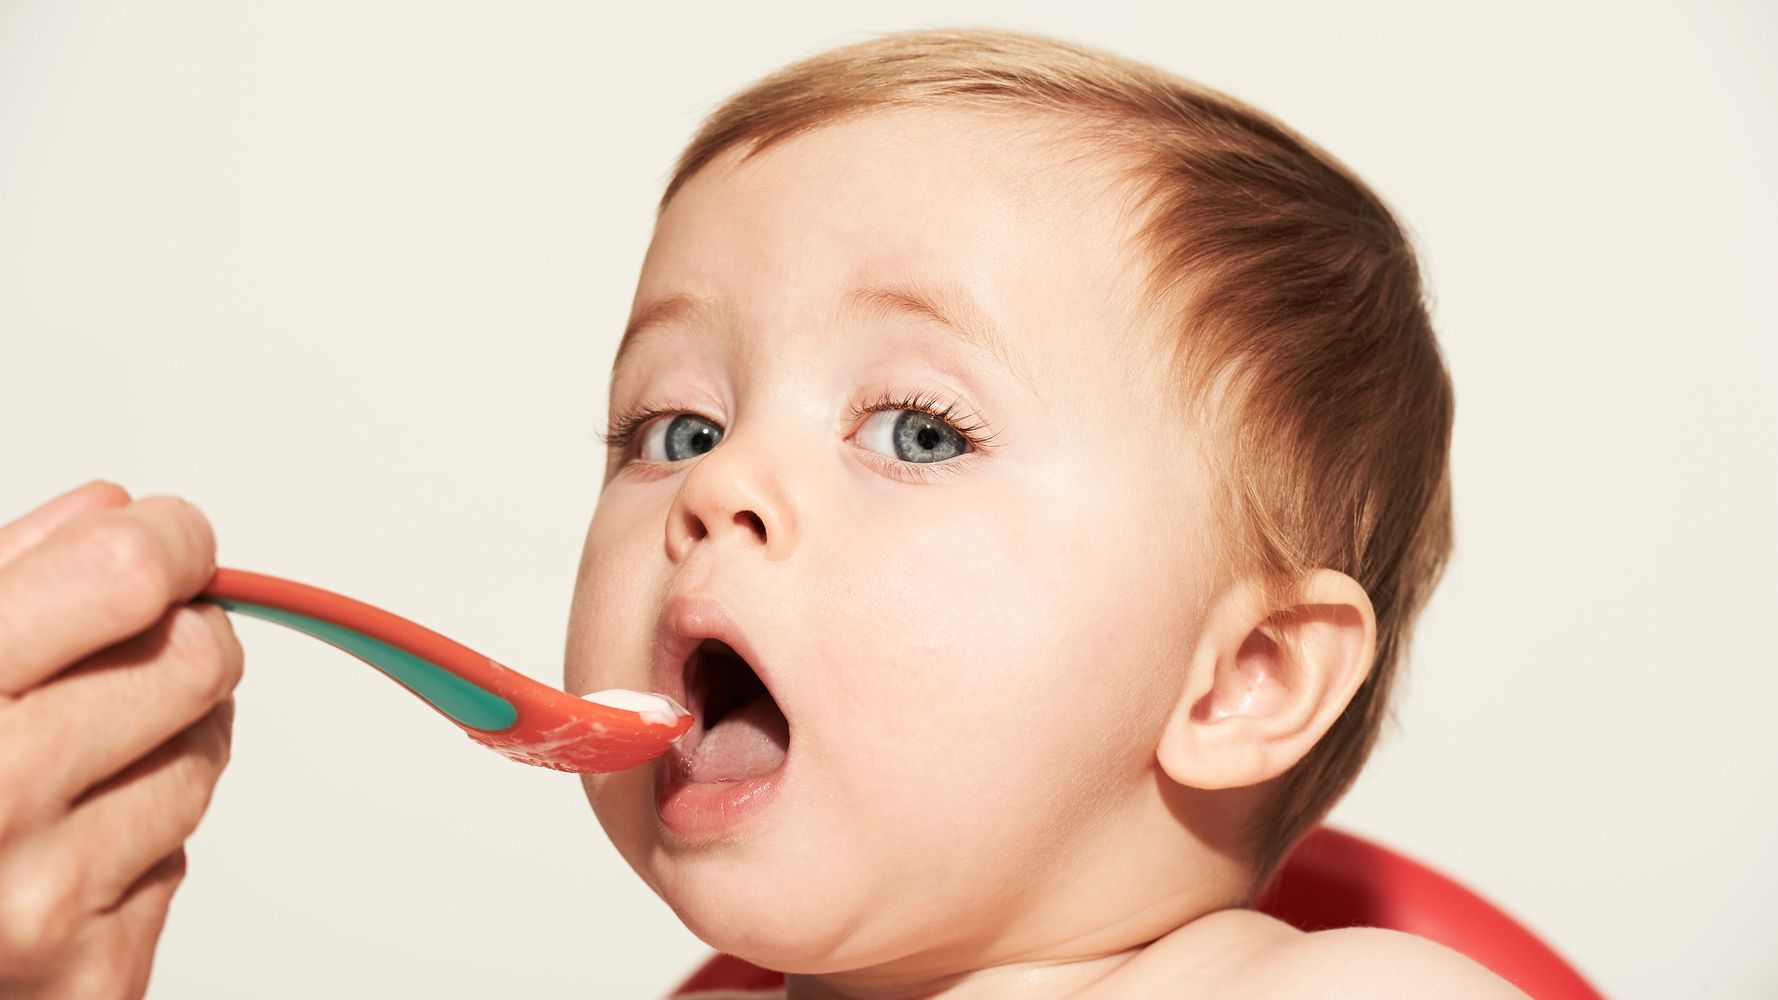 The Best Healthy Baby Food Tips, According To Experts